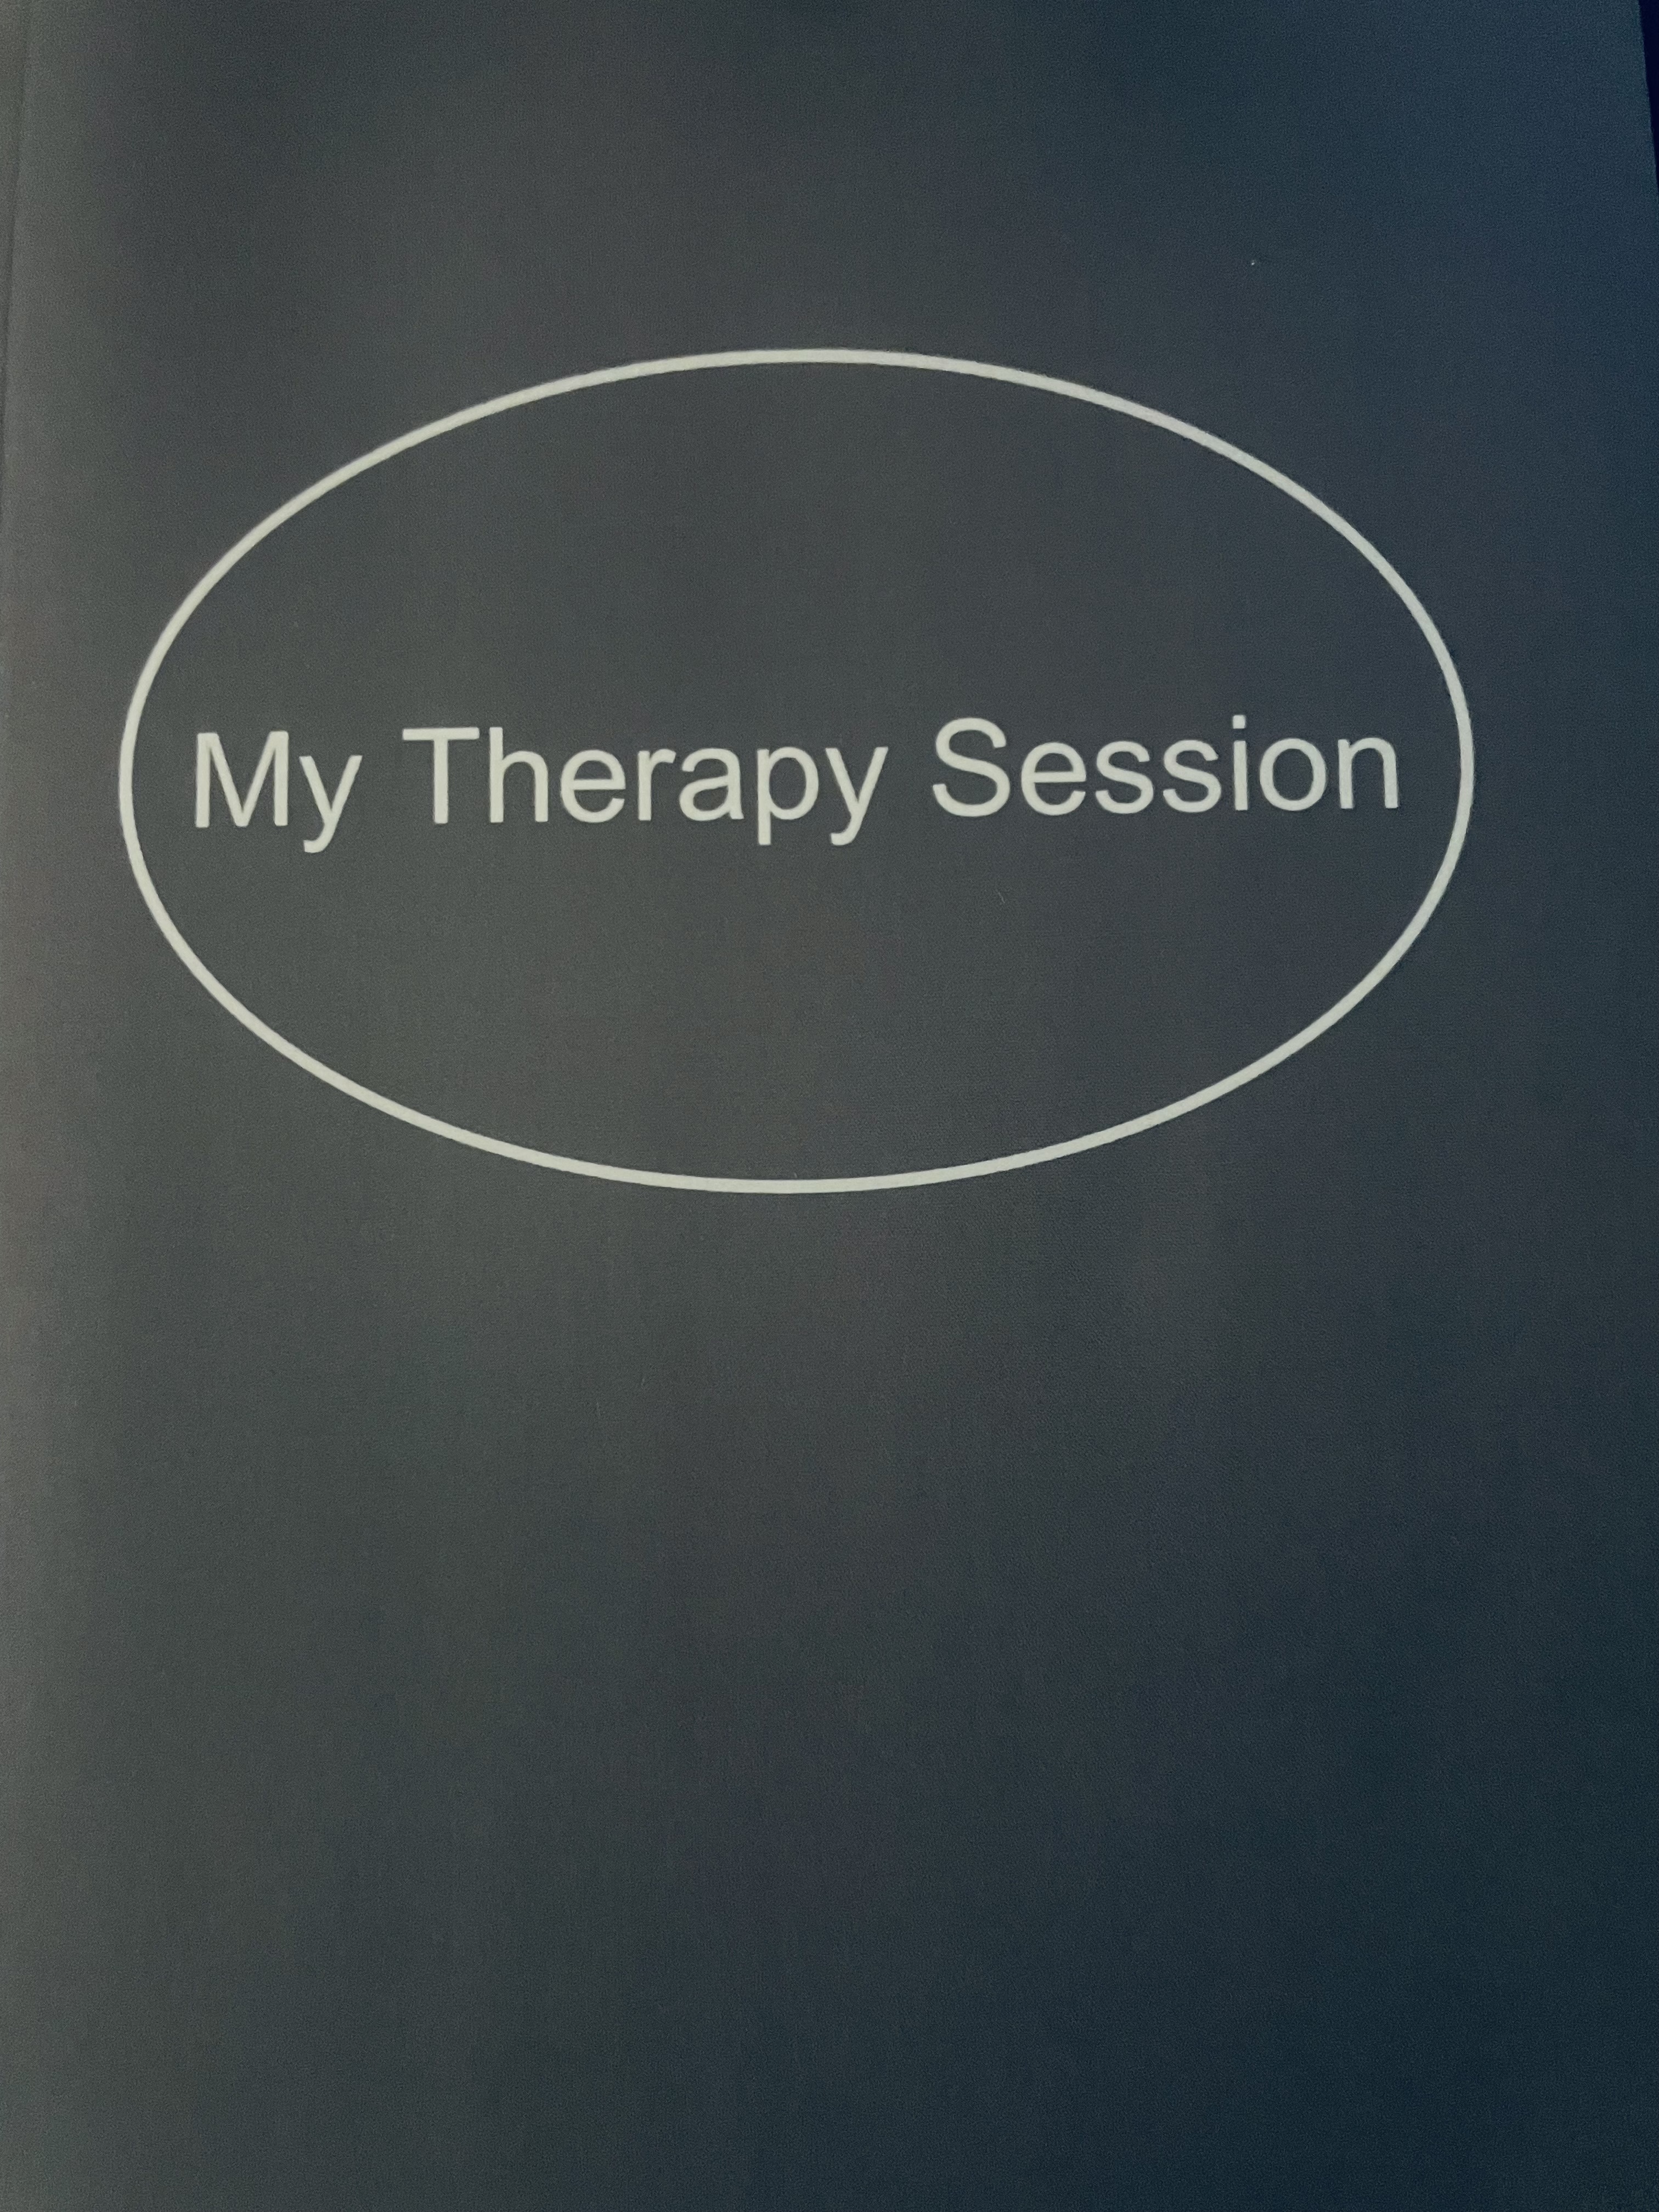 Purchase "My Therapy Session" Notebook thumbnail